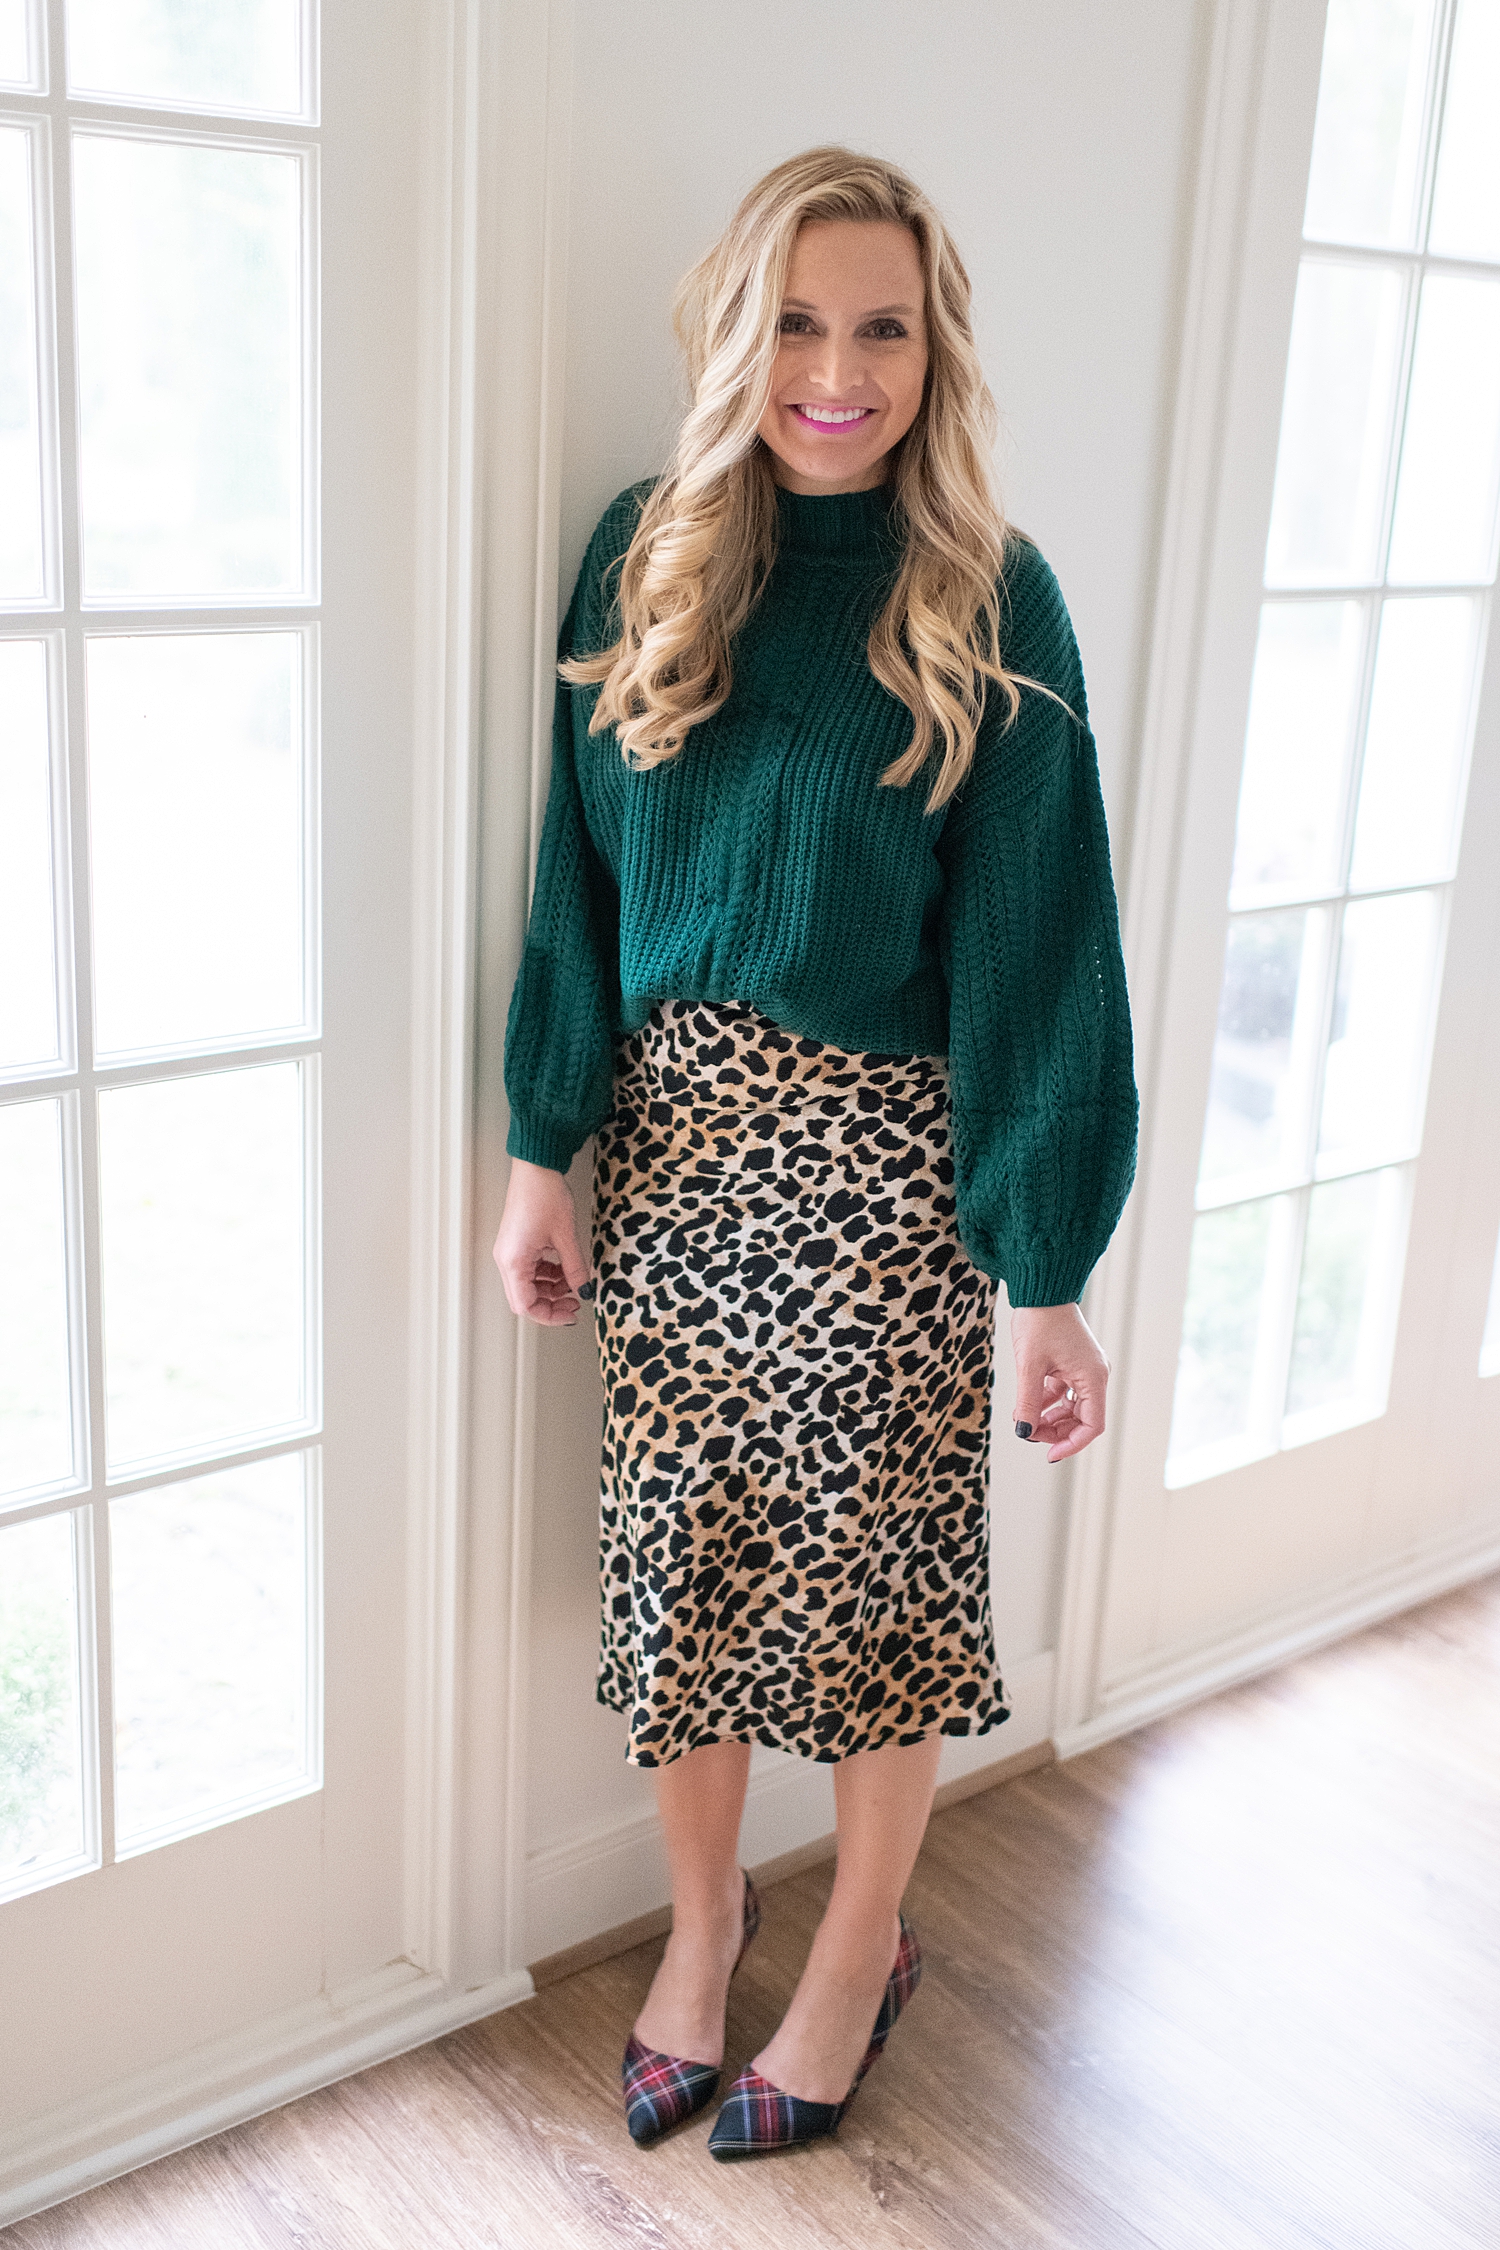 Fancy Ashley x Social Threads collection featured by top Houston fashion blogger, Fancy Ashley: image of a woman wearing a Social Threads Leopard skirt and green sweater